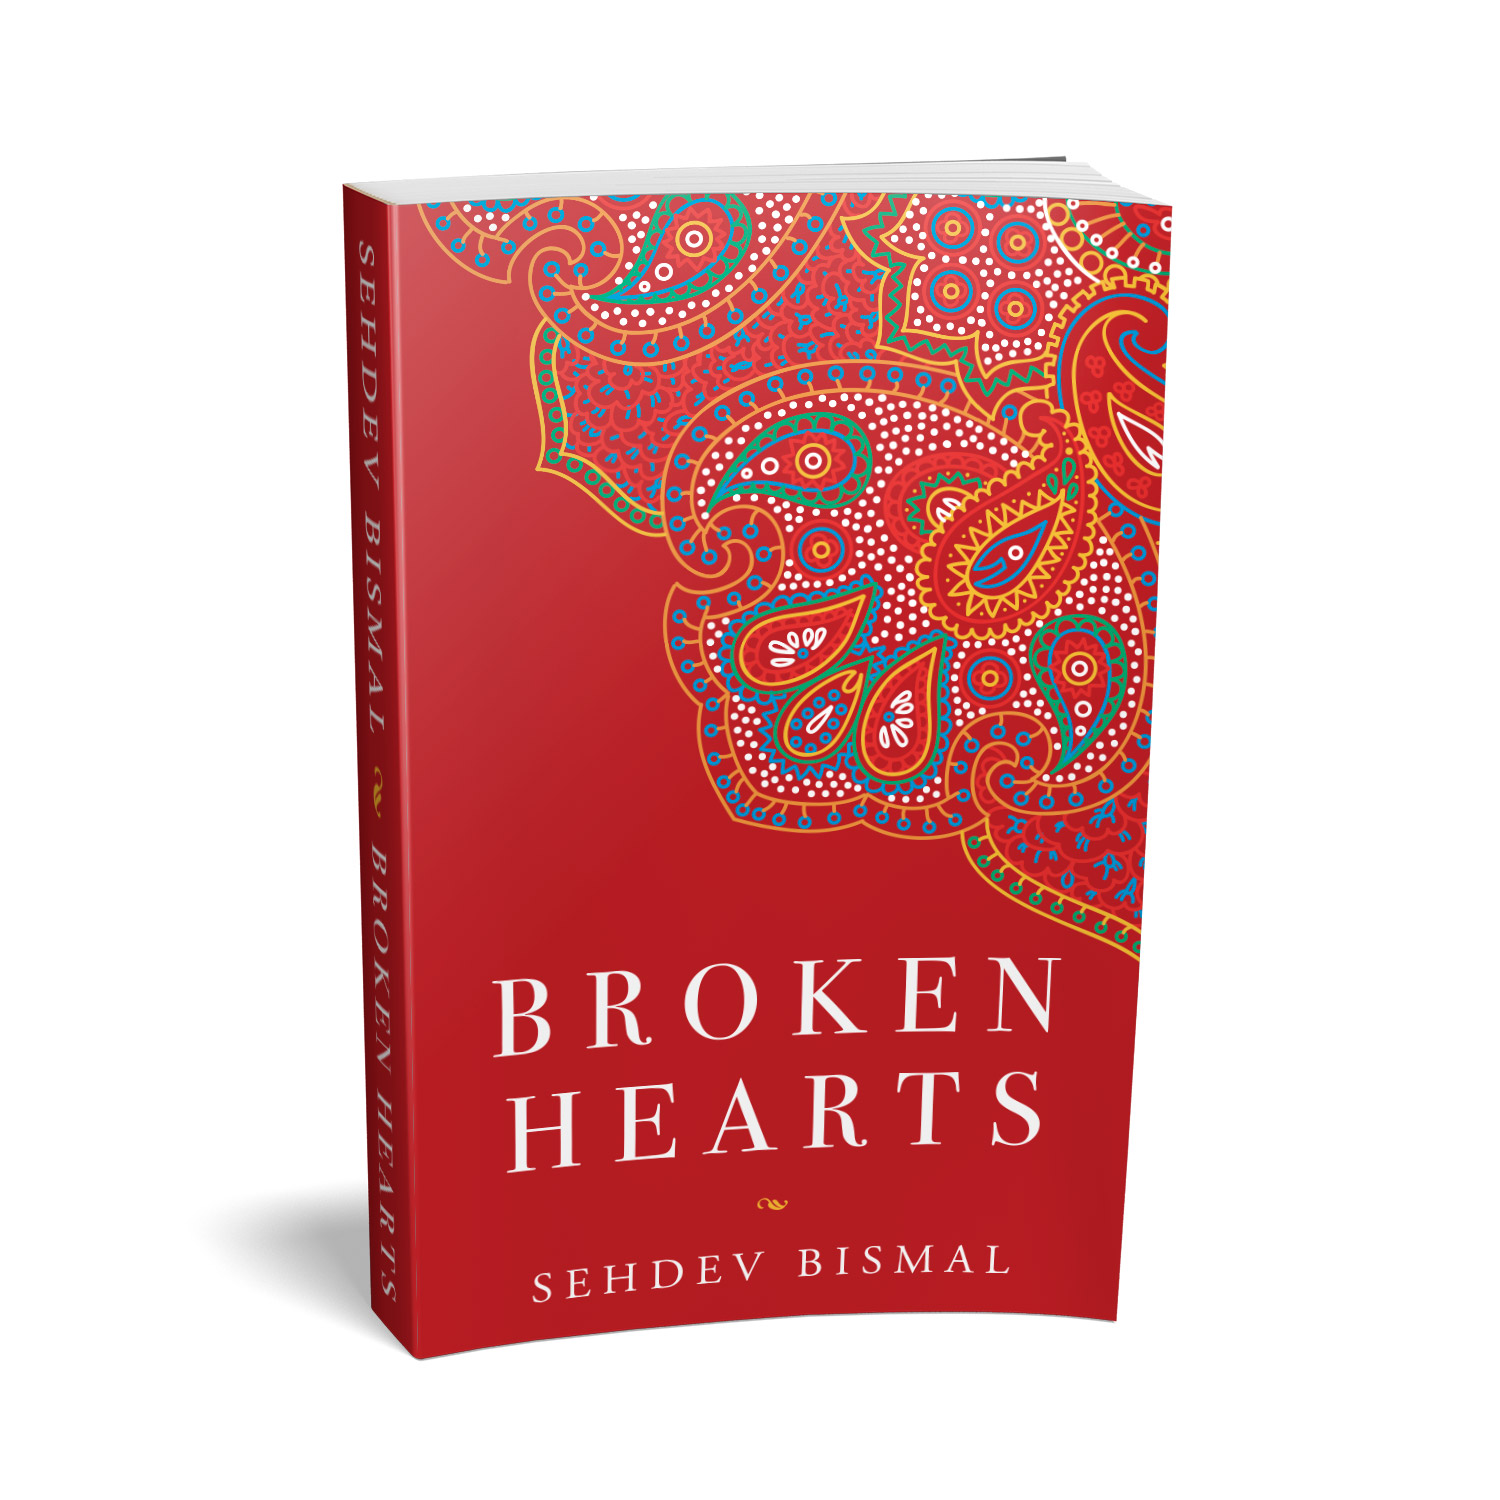 'Broken Hearts' is a heartfelt romantic drama, of love and loss. The author is Sehdev Bismal. The book cover design and interior formatting are by Mark Thomas. To learn more about what Mark could do for your book, please visit coverness.com.